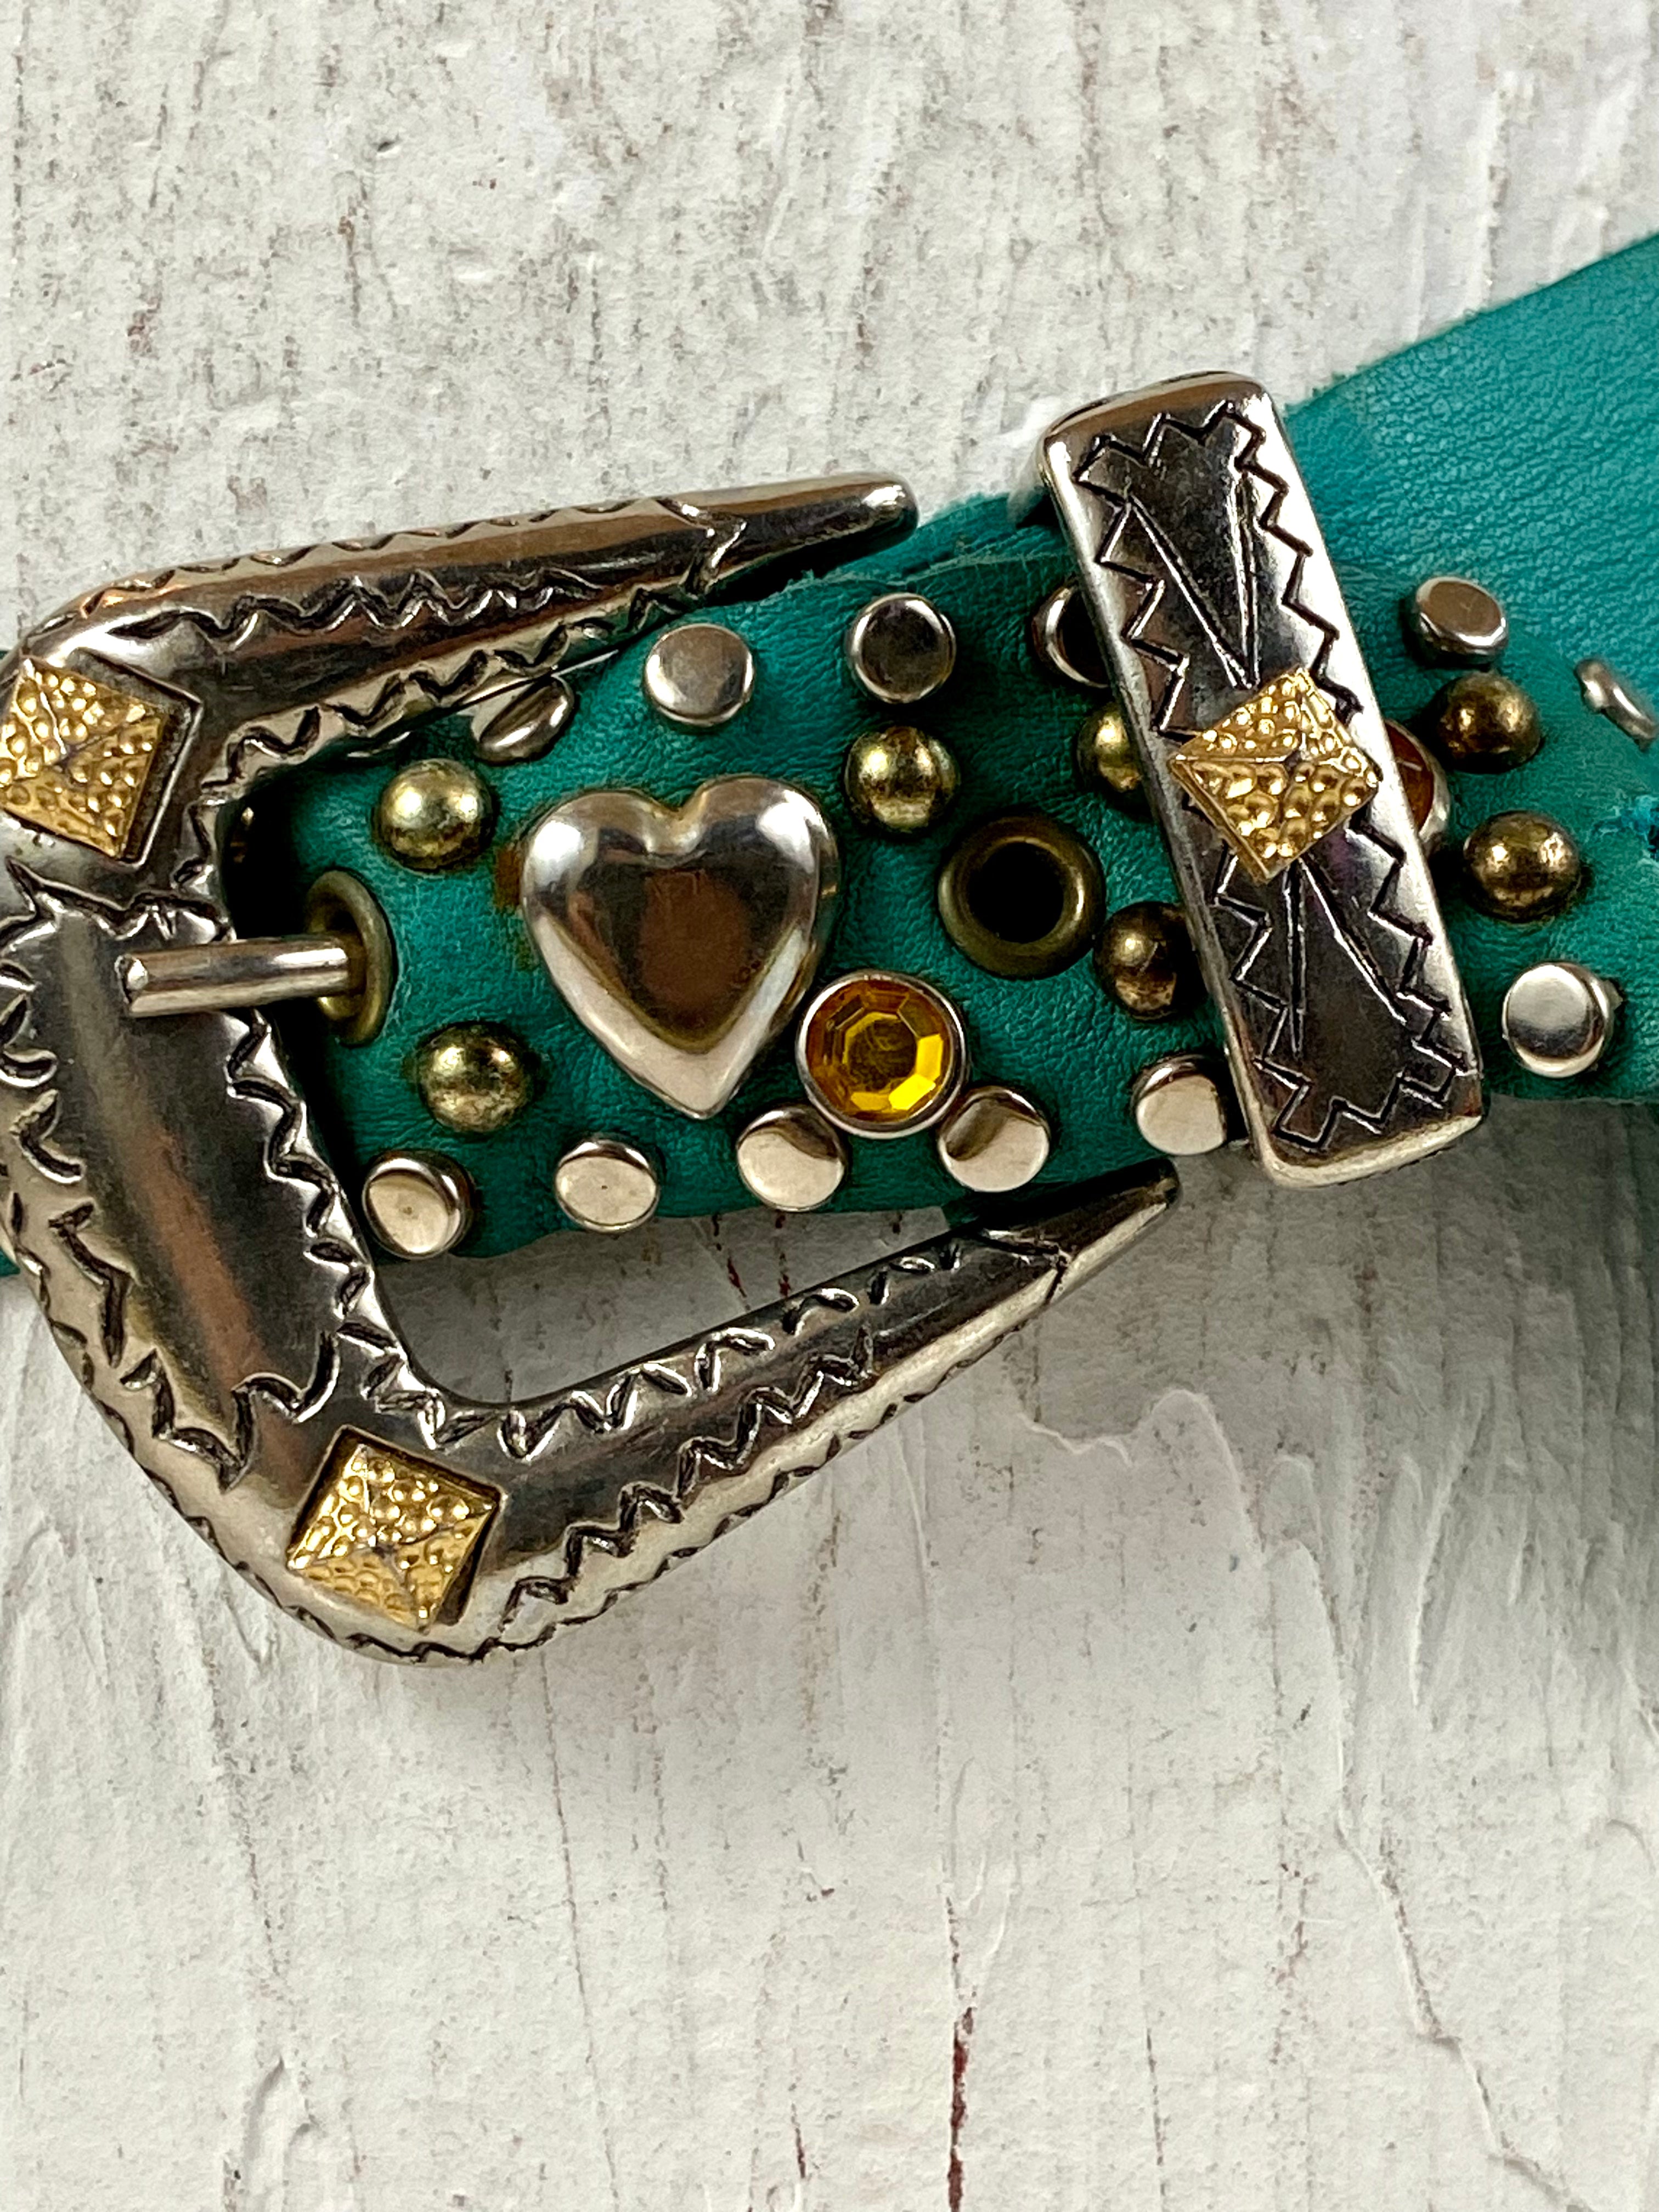 Leather Gemstones and Metal Studs Star hearts and horses